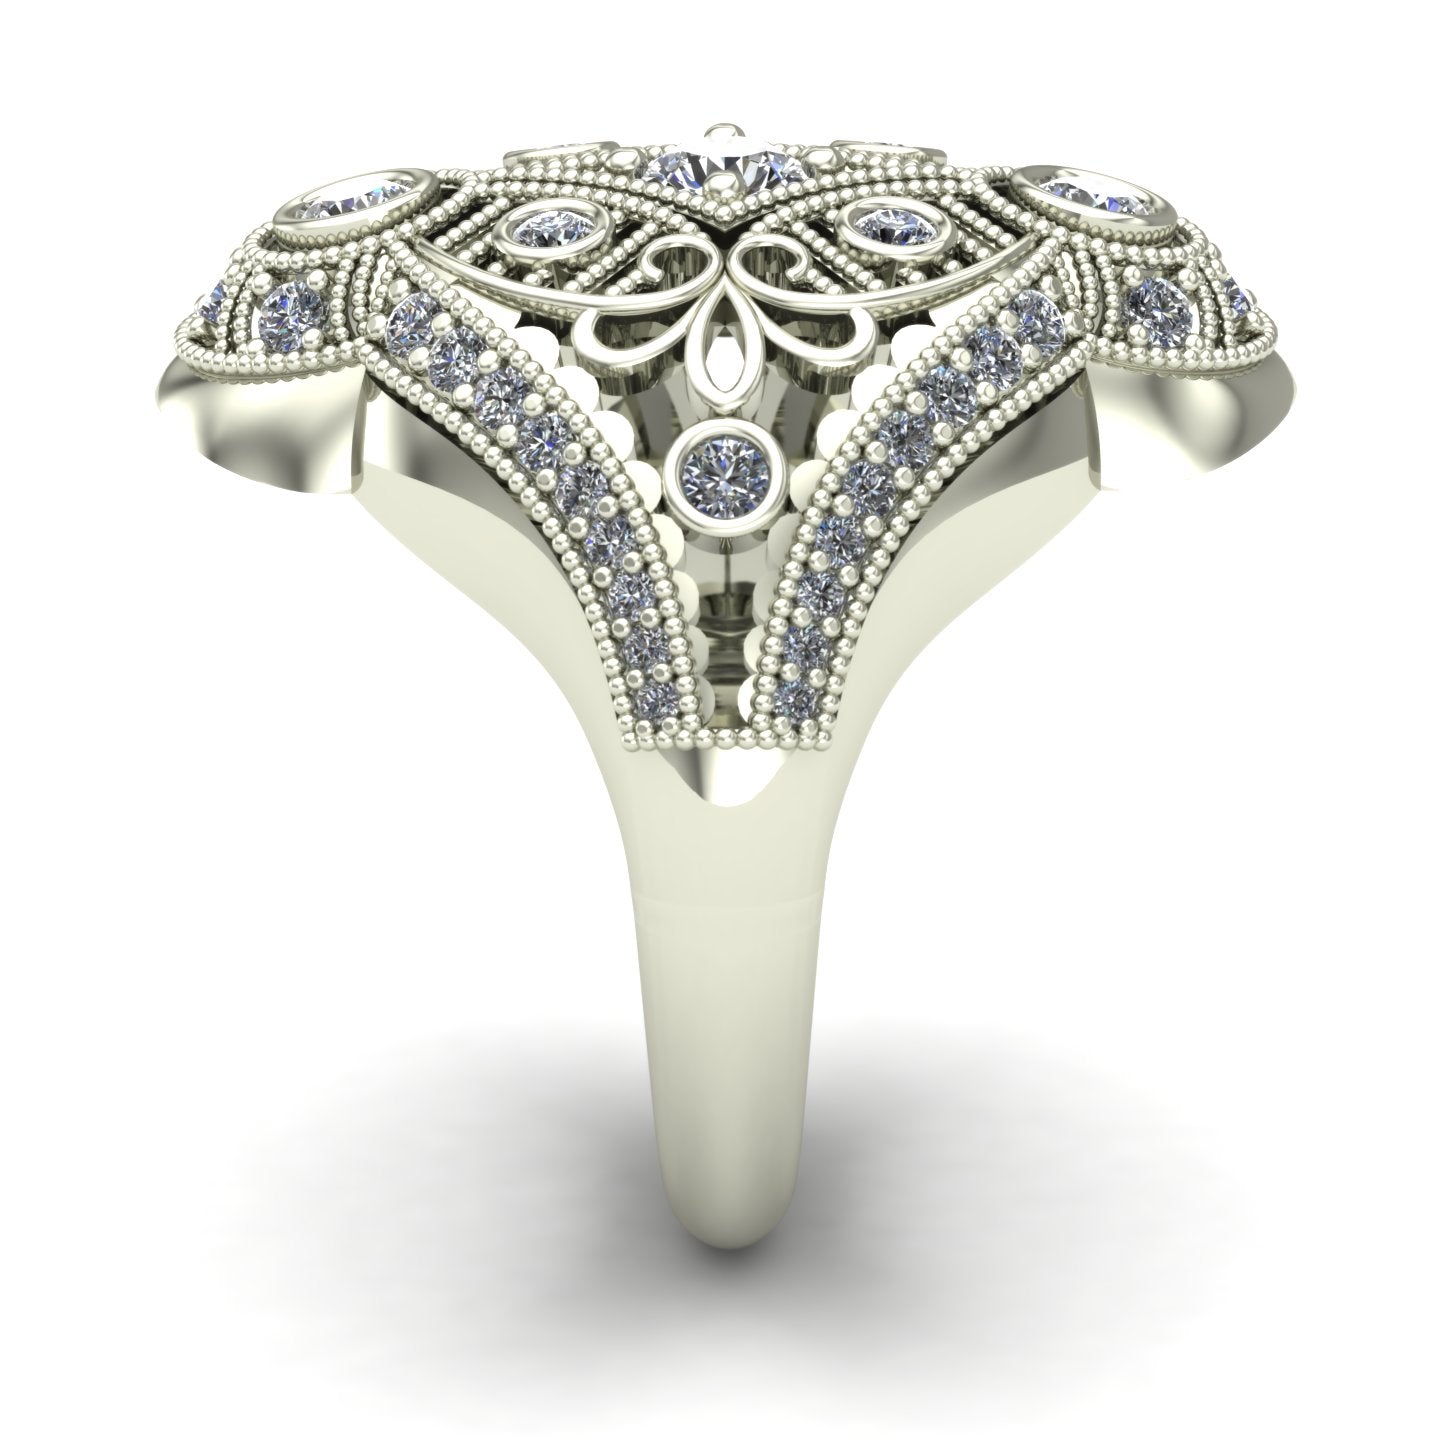 one carat diamond vintage style cocktail ring in 14k white gold - Charles Babb Designs - side view